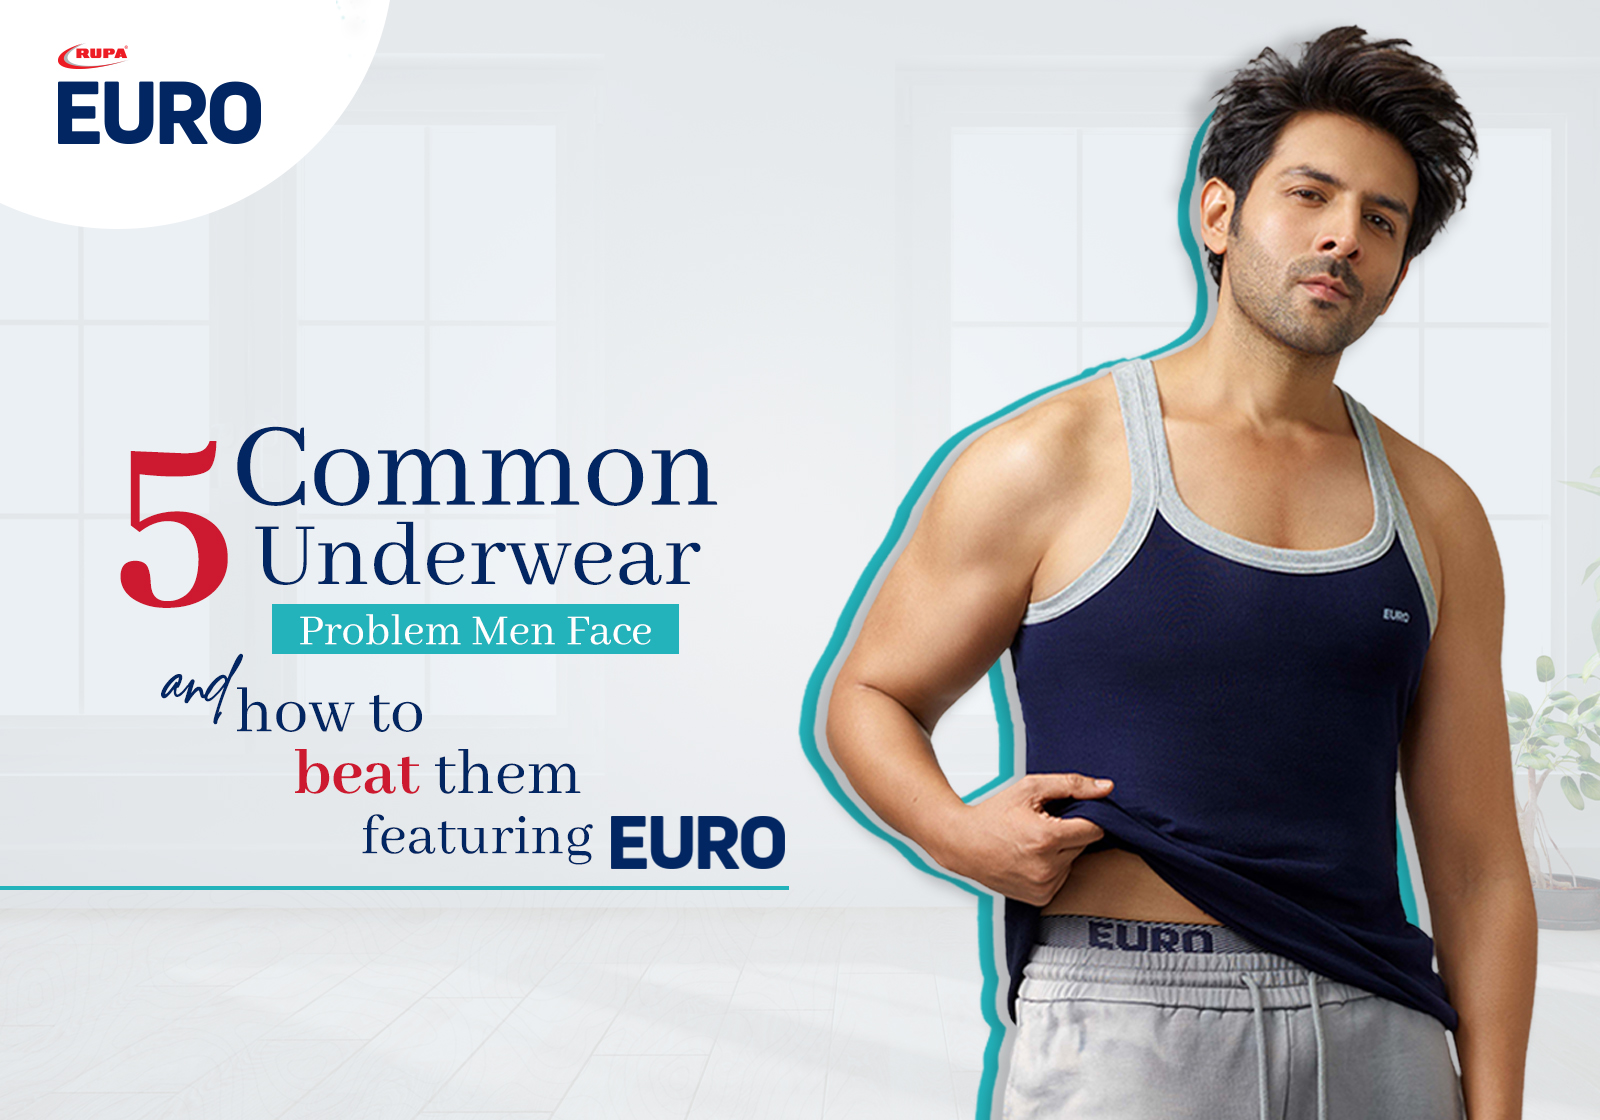 5 Common Underwear Problem Men Face and how to beat them featuring Euro